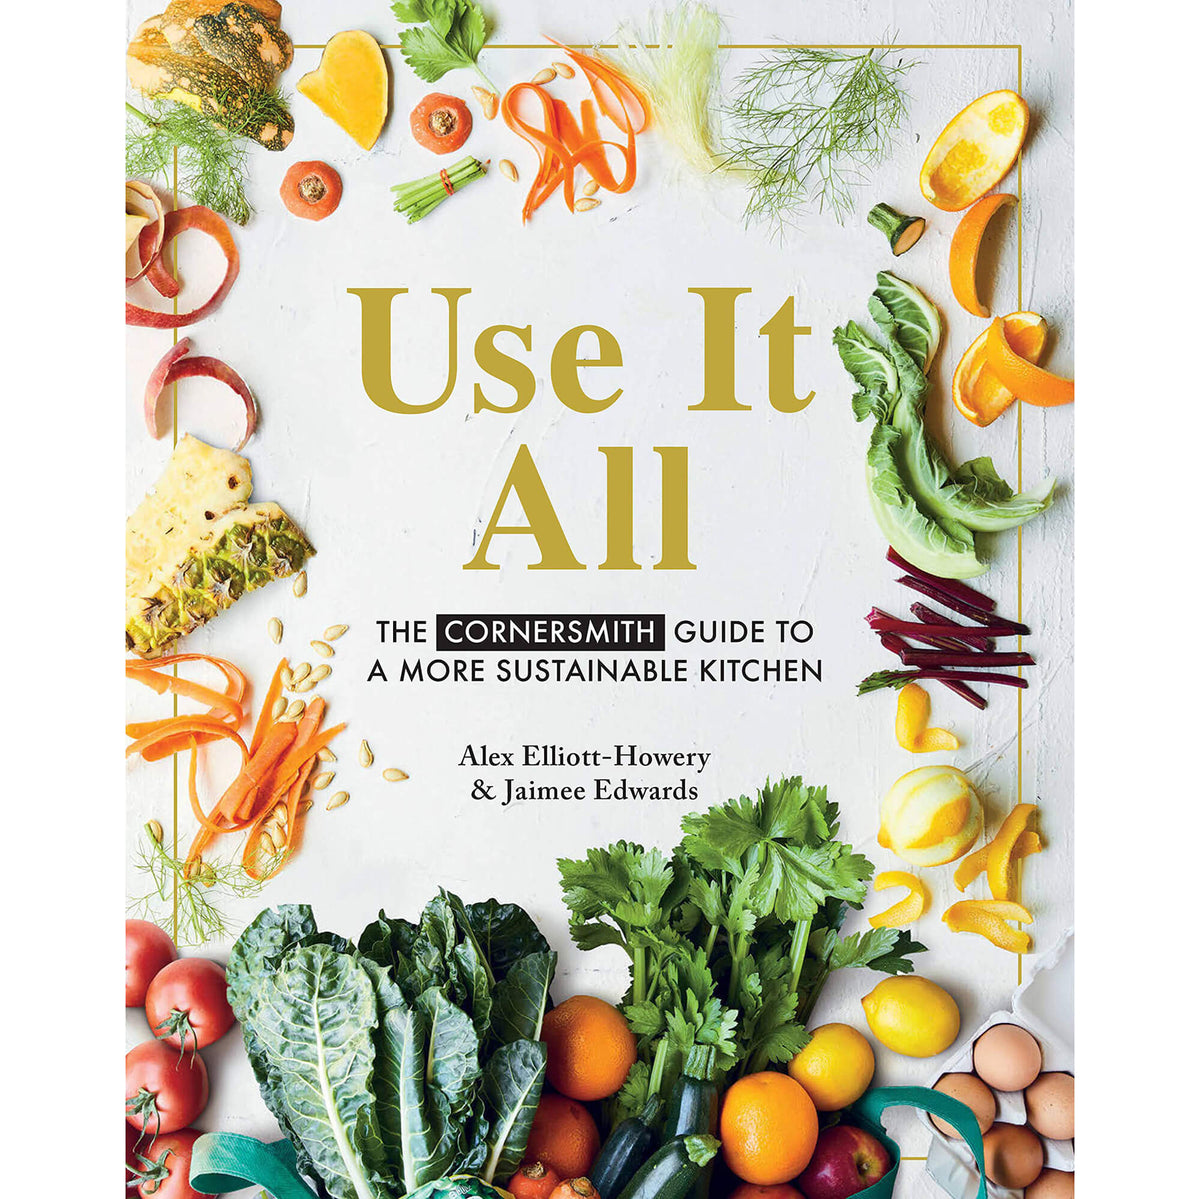 Use it All: The Cornersmith Guide to a More Sustainable Kitchen front cover.